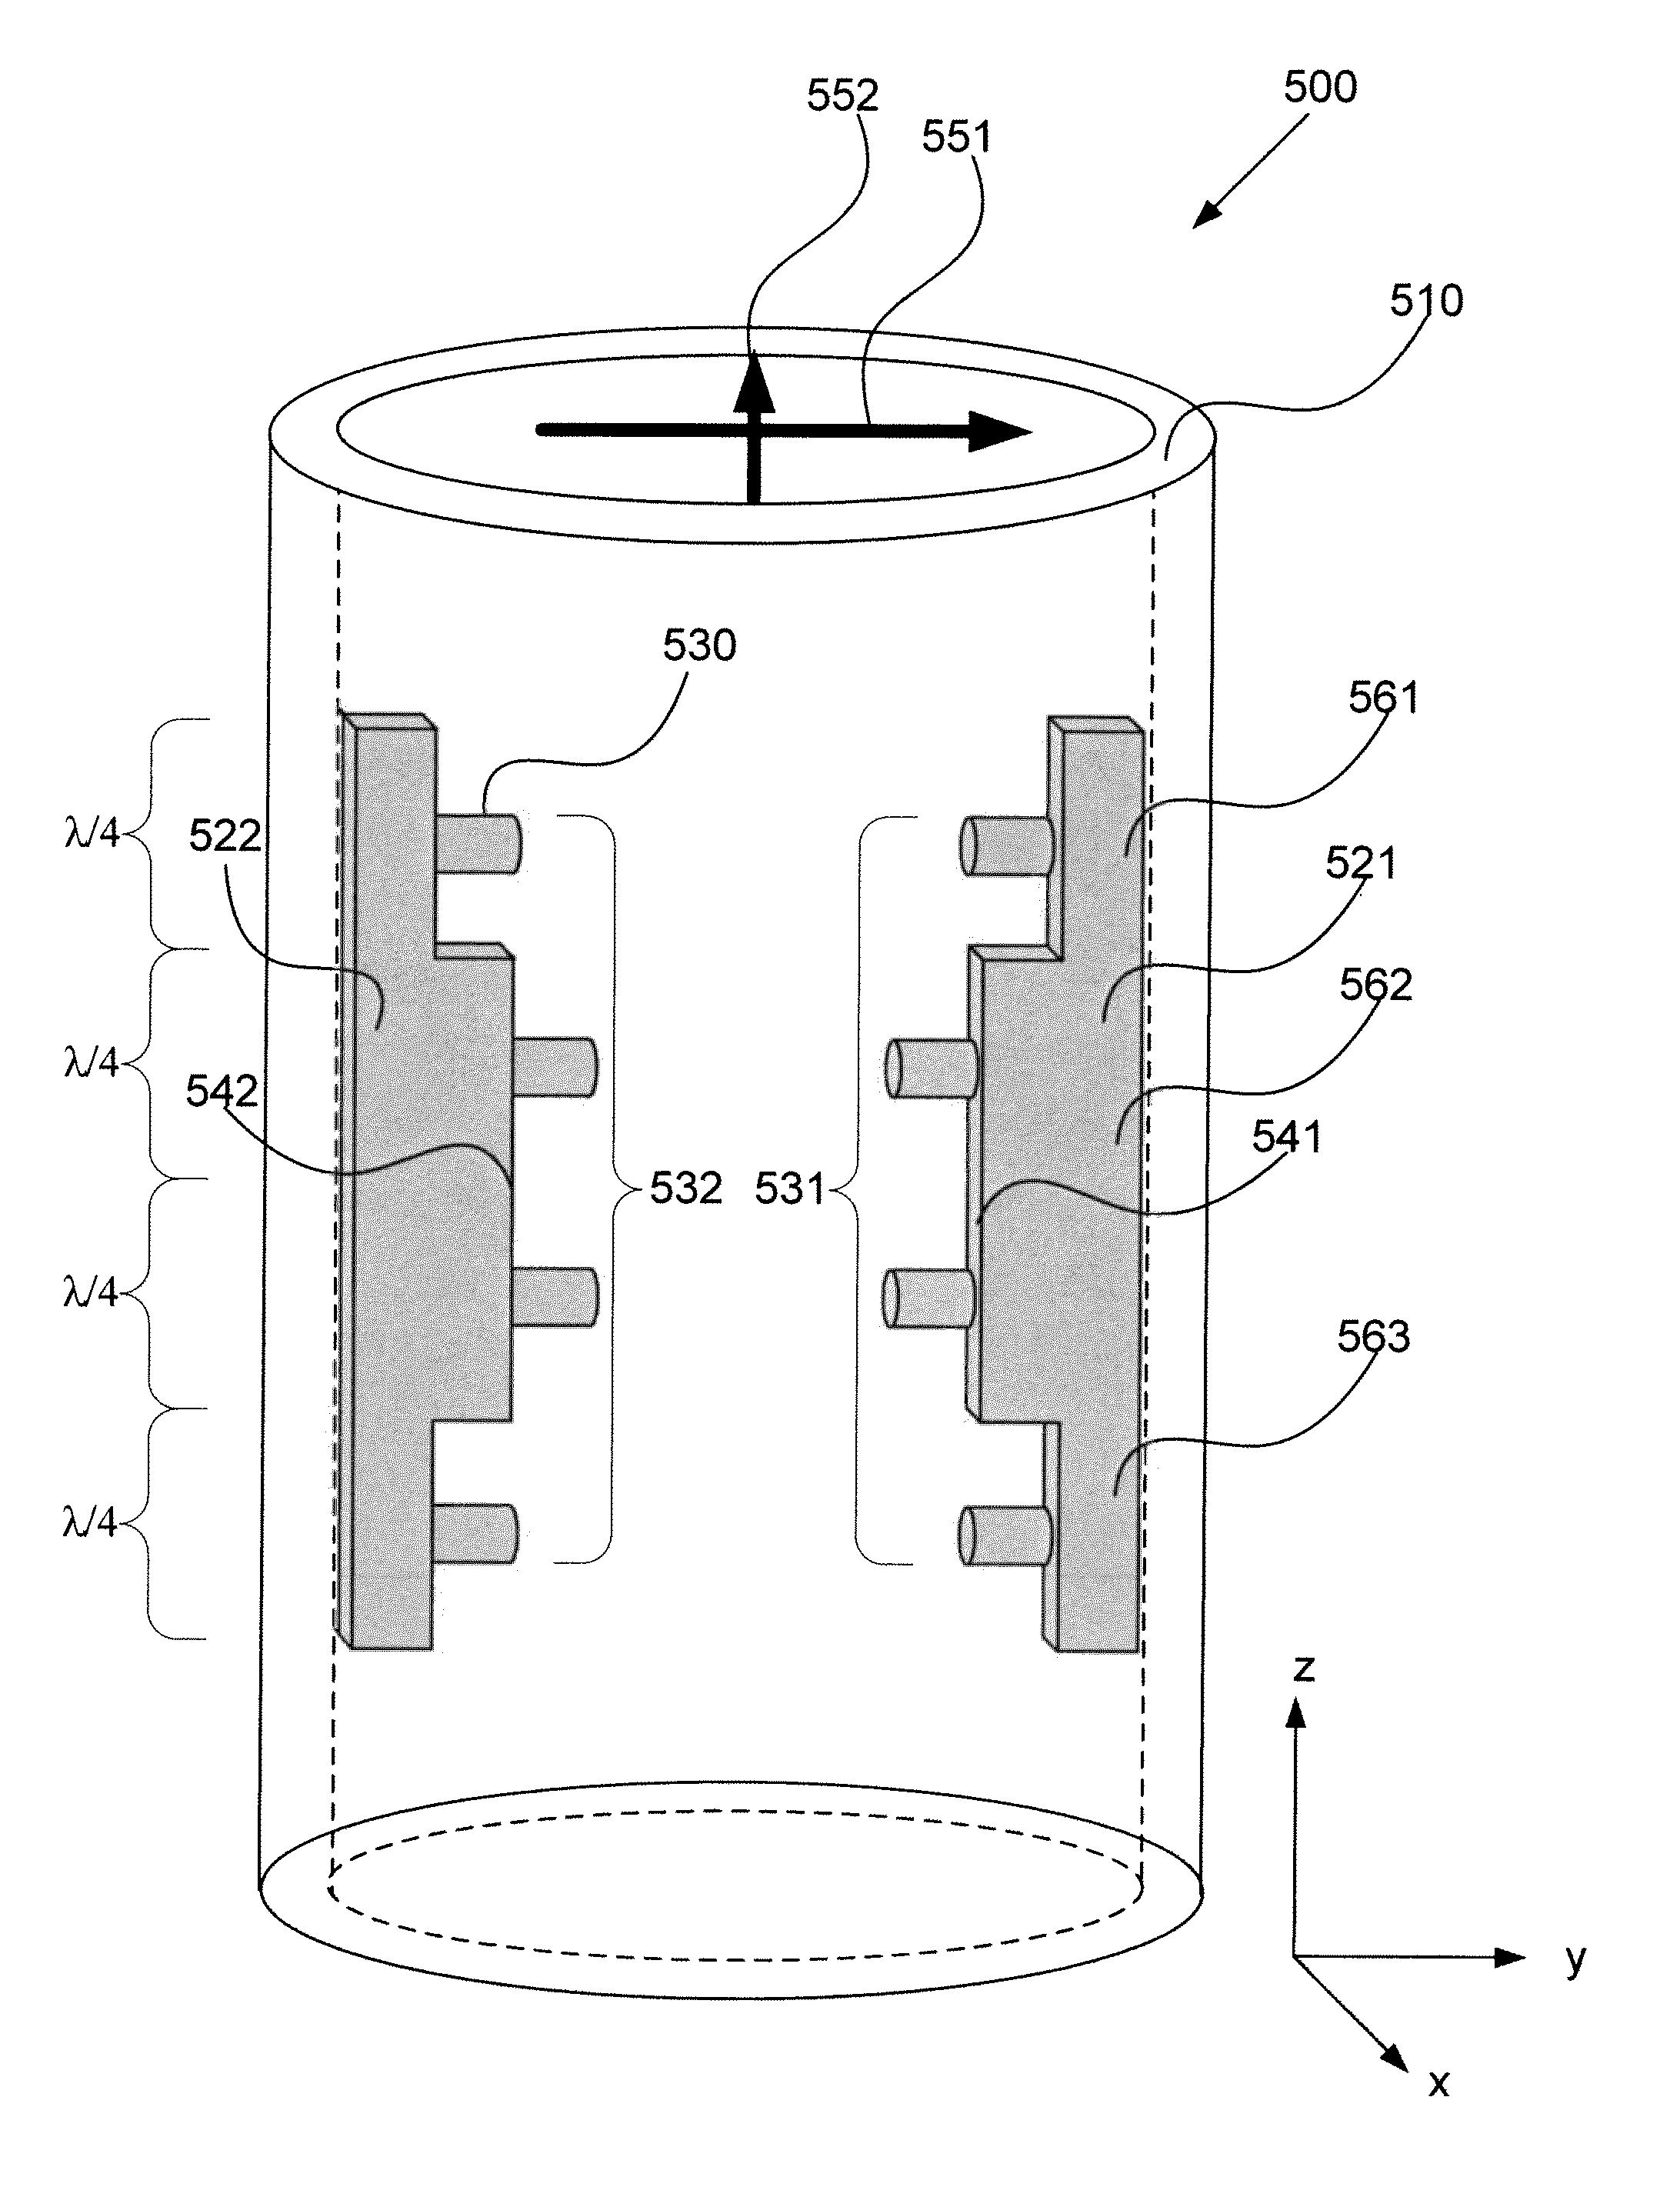 High power waveguide polarizer with broad bandwidth and low loss, and methods of making and using same